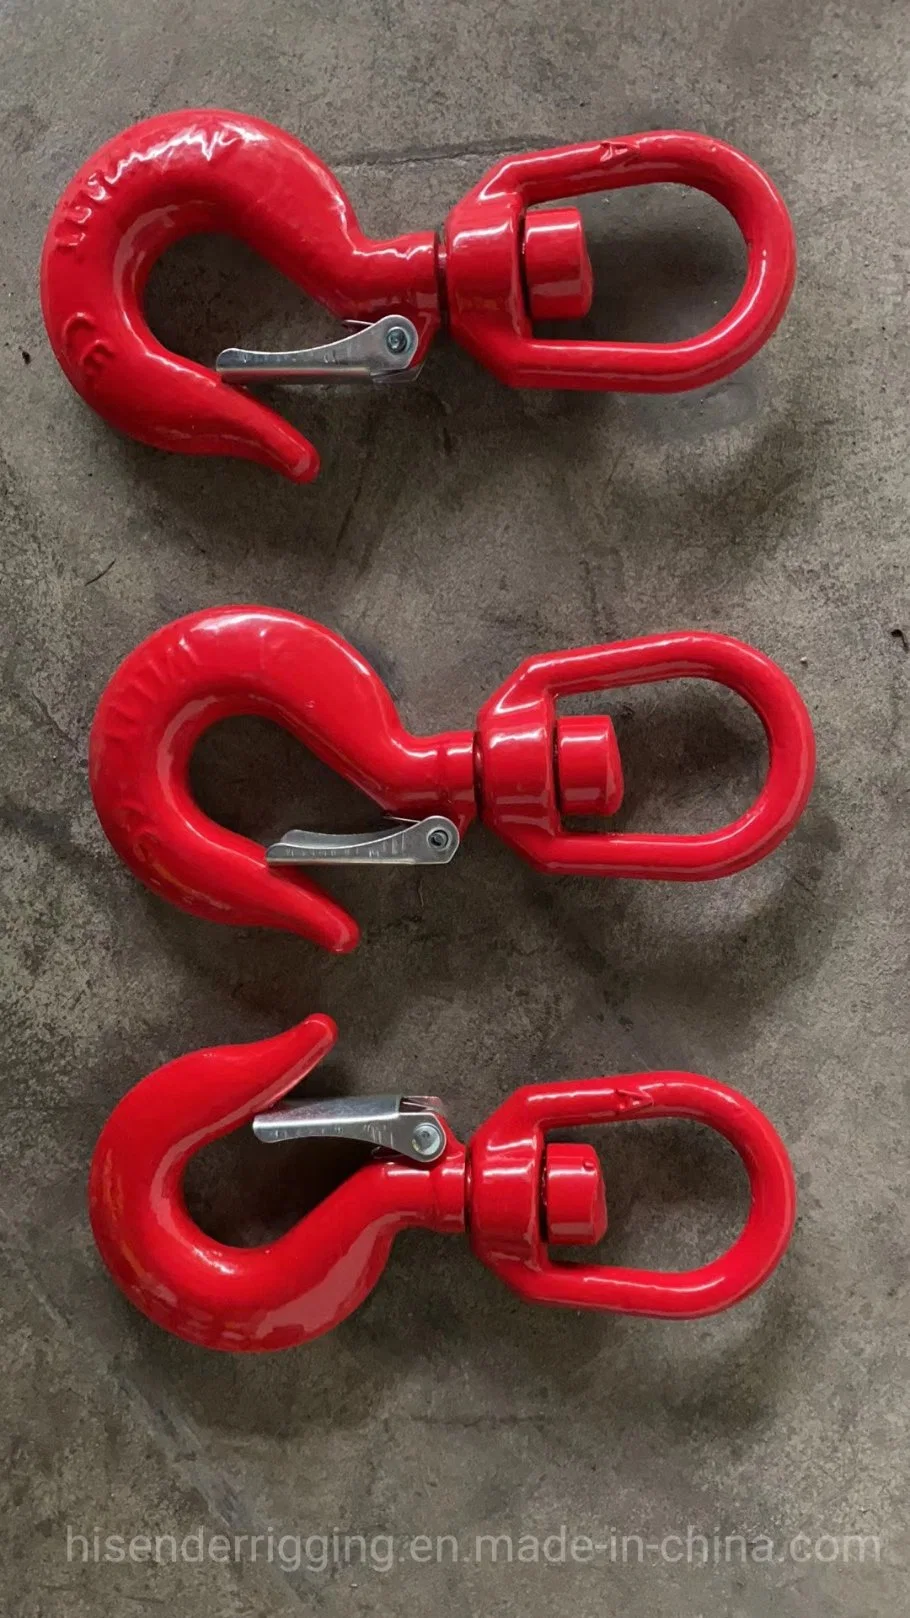 Kinds of Hooks, Master Link, Connecting Links for Loading, High Quality